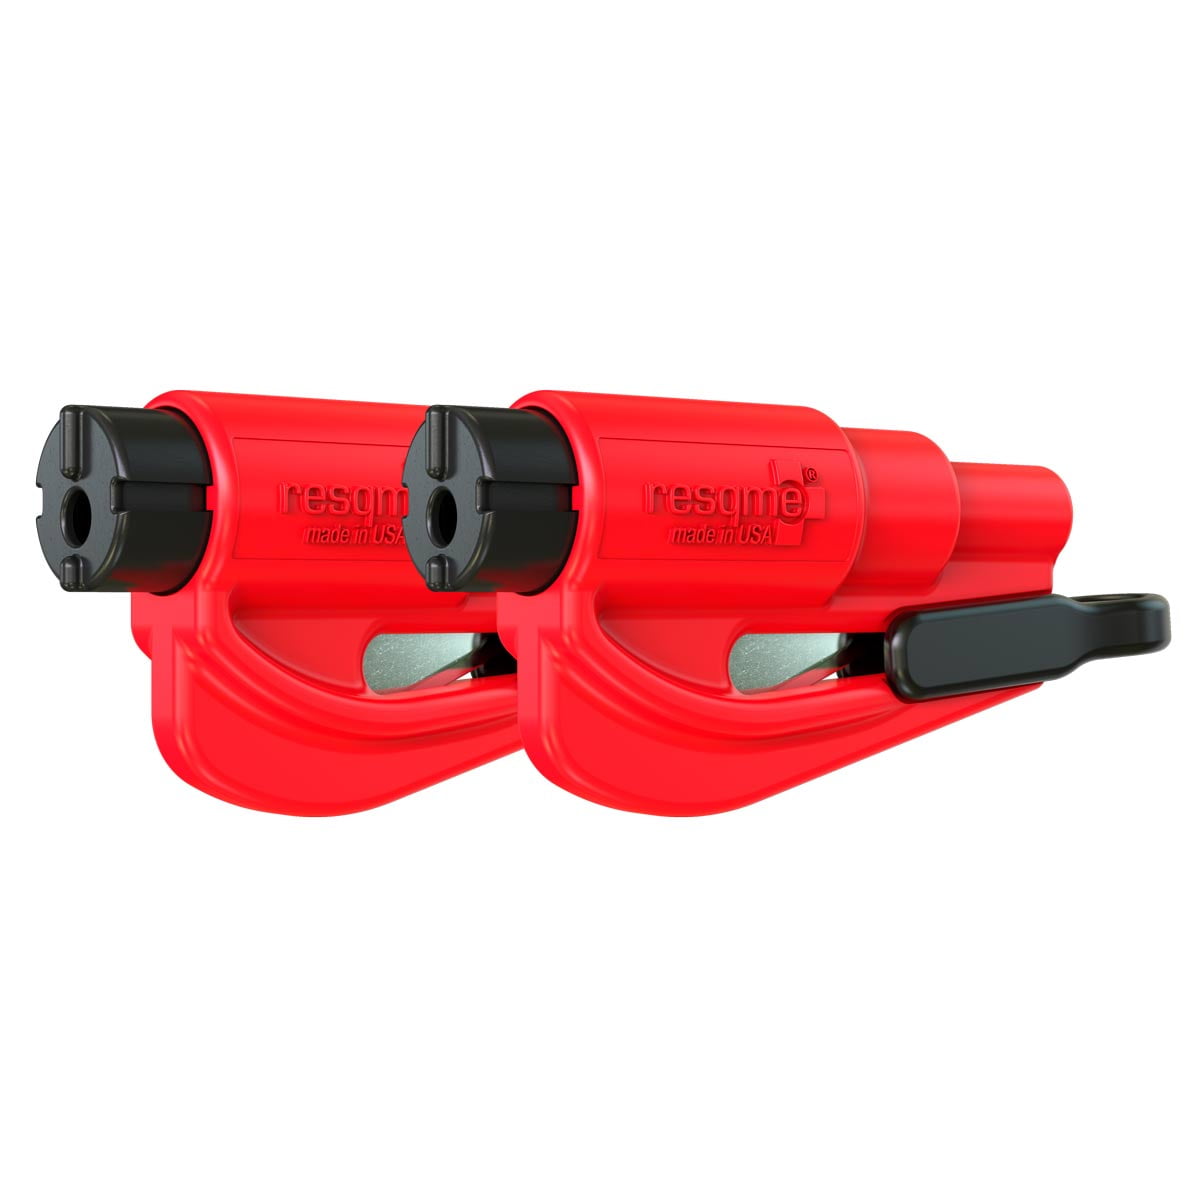 Resqme Pack of 2, The Original Emergency Keychain Car Escape Tool, 2-in-1  Seatbelt Cutter and Window Breaker, Reliable Compact Emergency Hammer, Red  